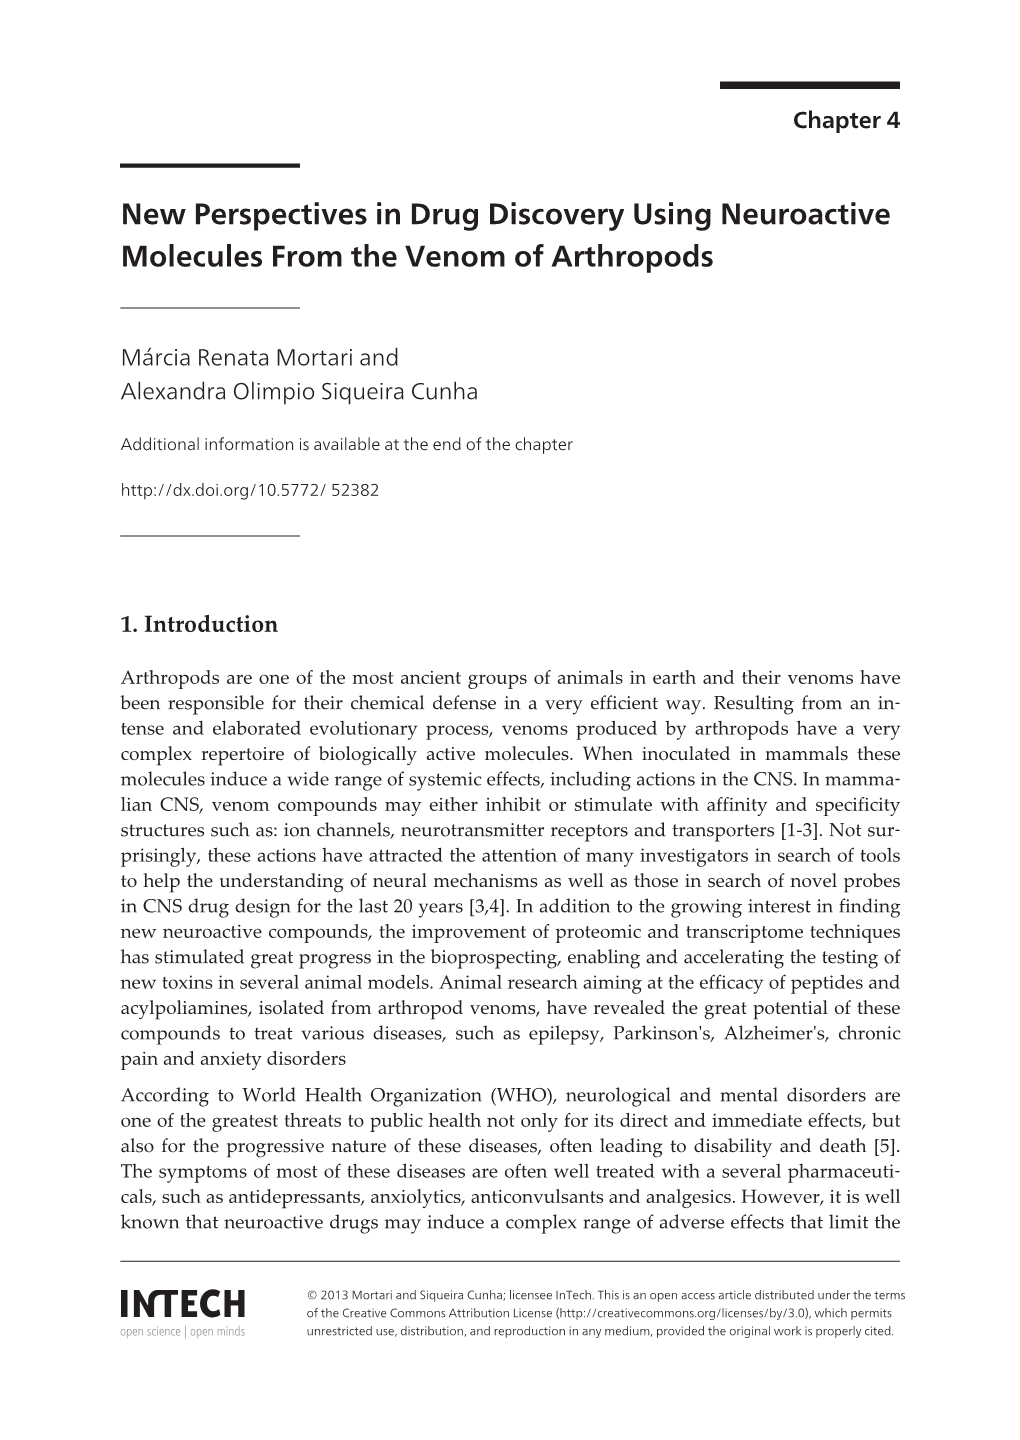 New Perspectives in Drug Discovery Using Neuroactive Molecules from the Venom of Arthropods